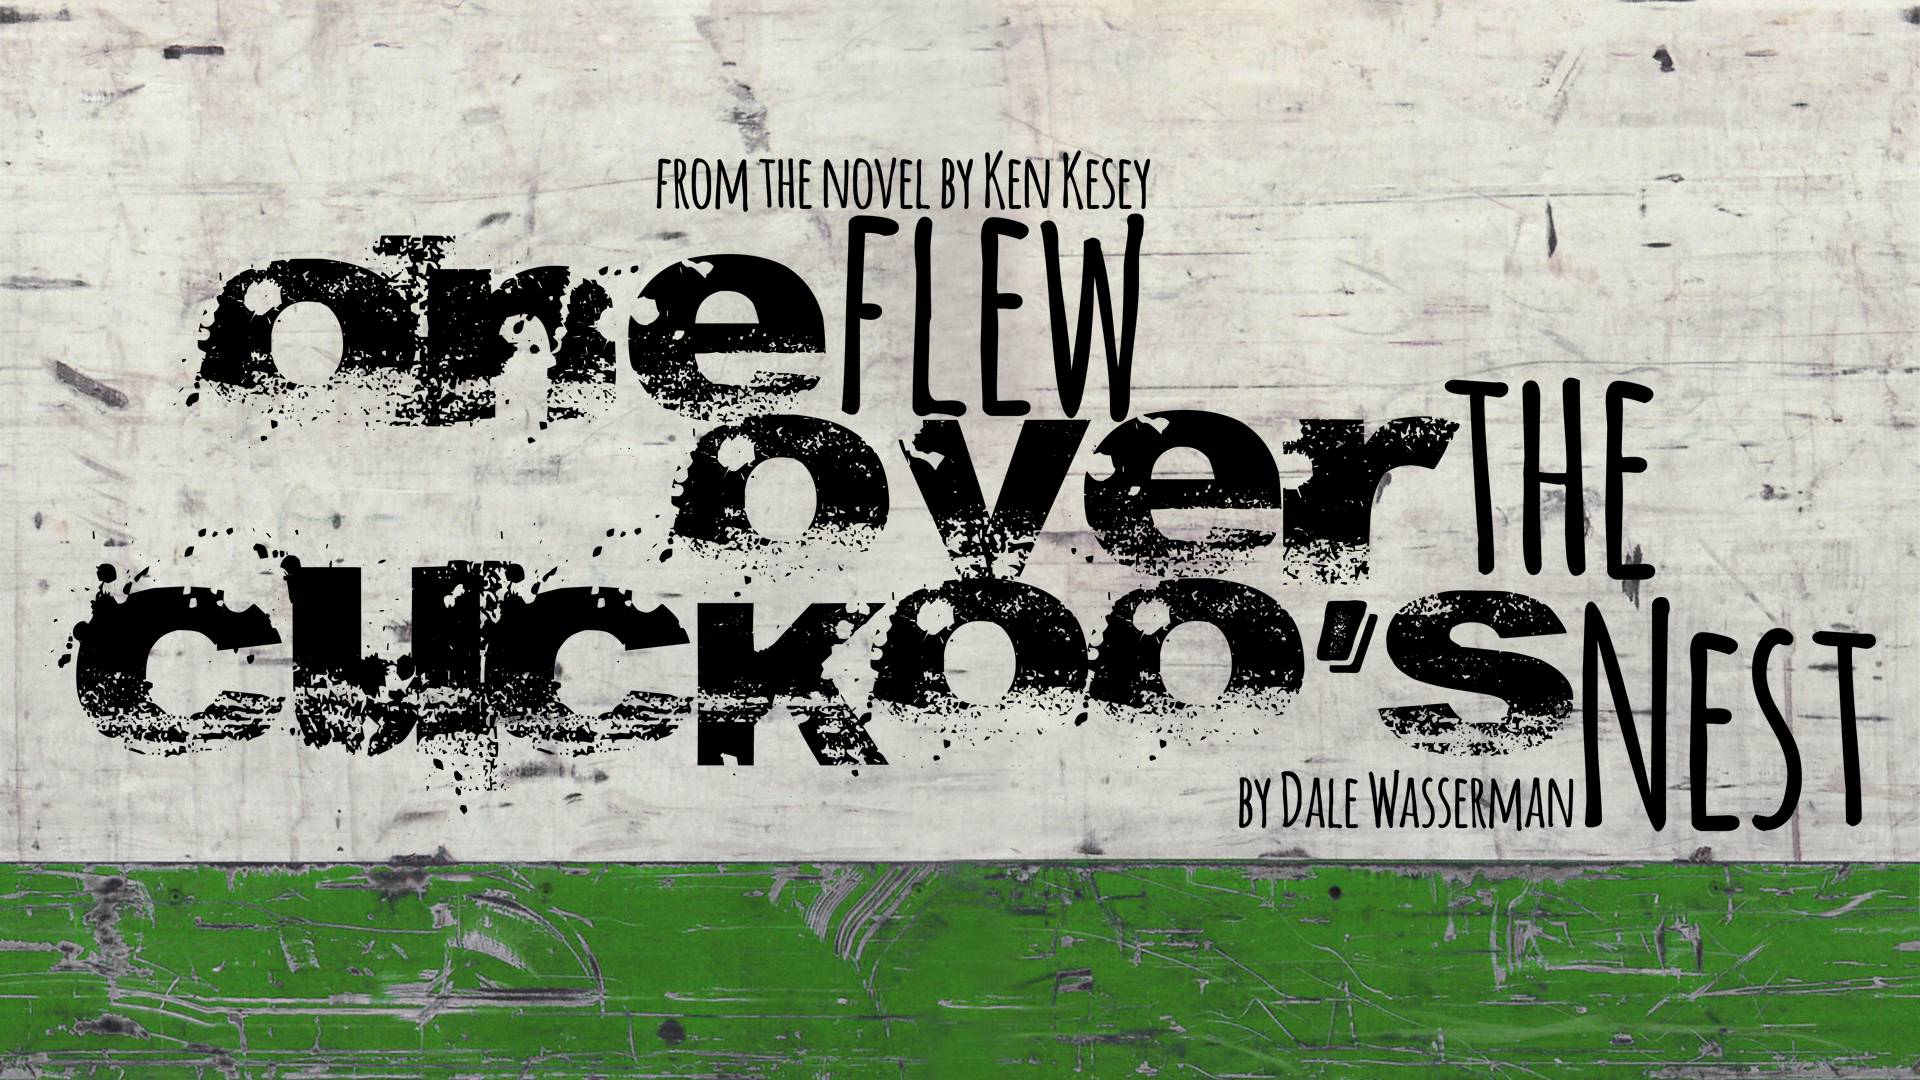 Auditions announced for ONE FLEW OVER THE CUCKOO’S NEST – Paxton